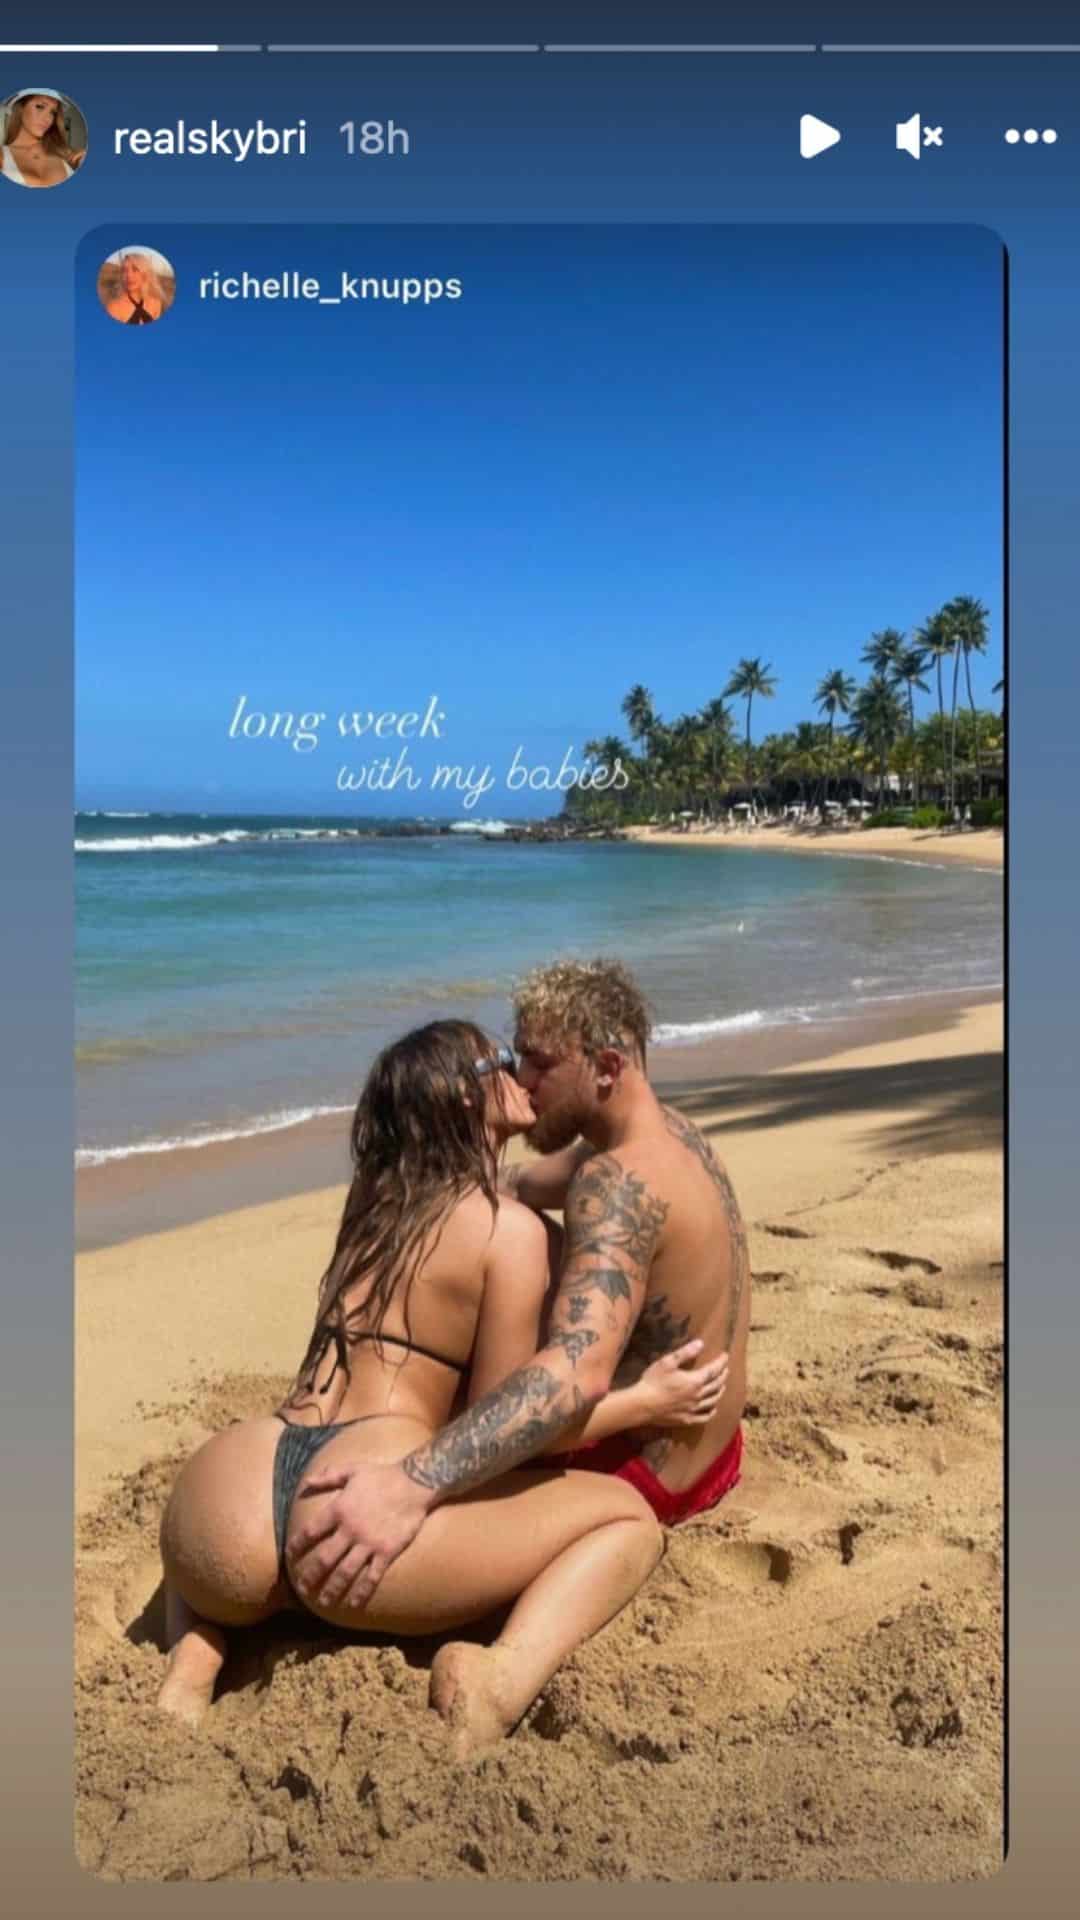 jake paul and onlyfans girl on a beach